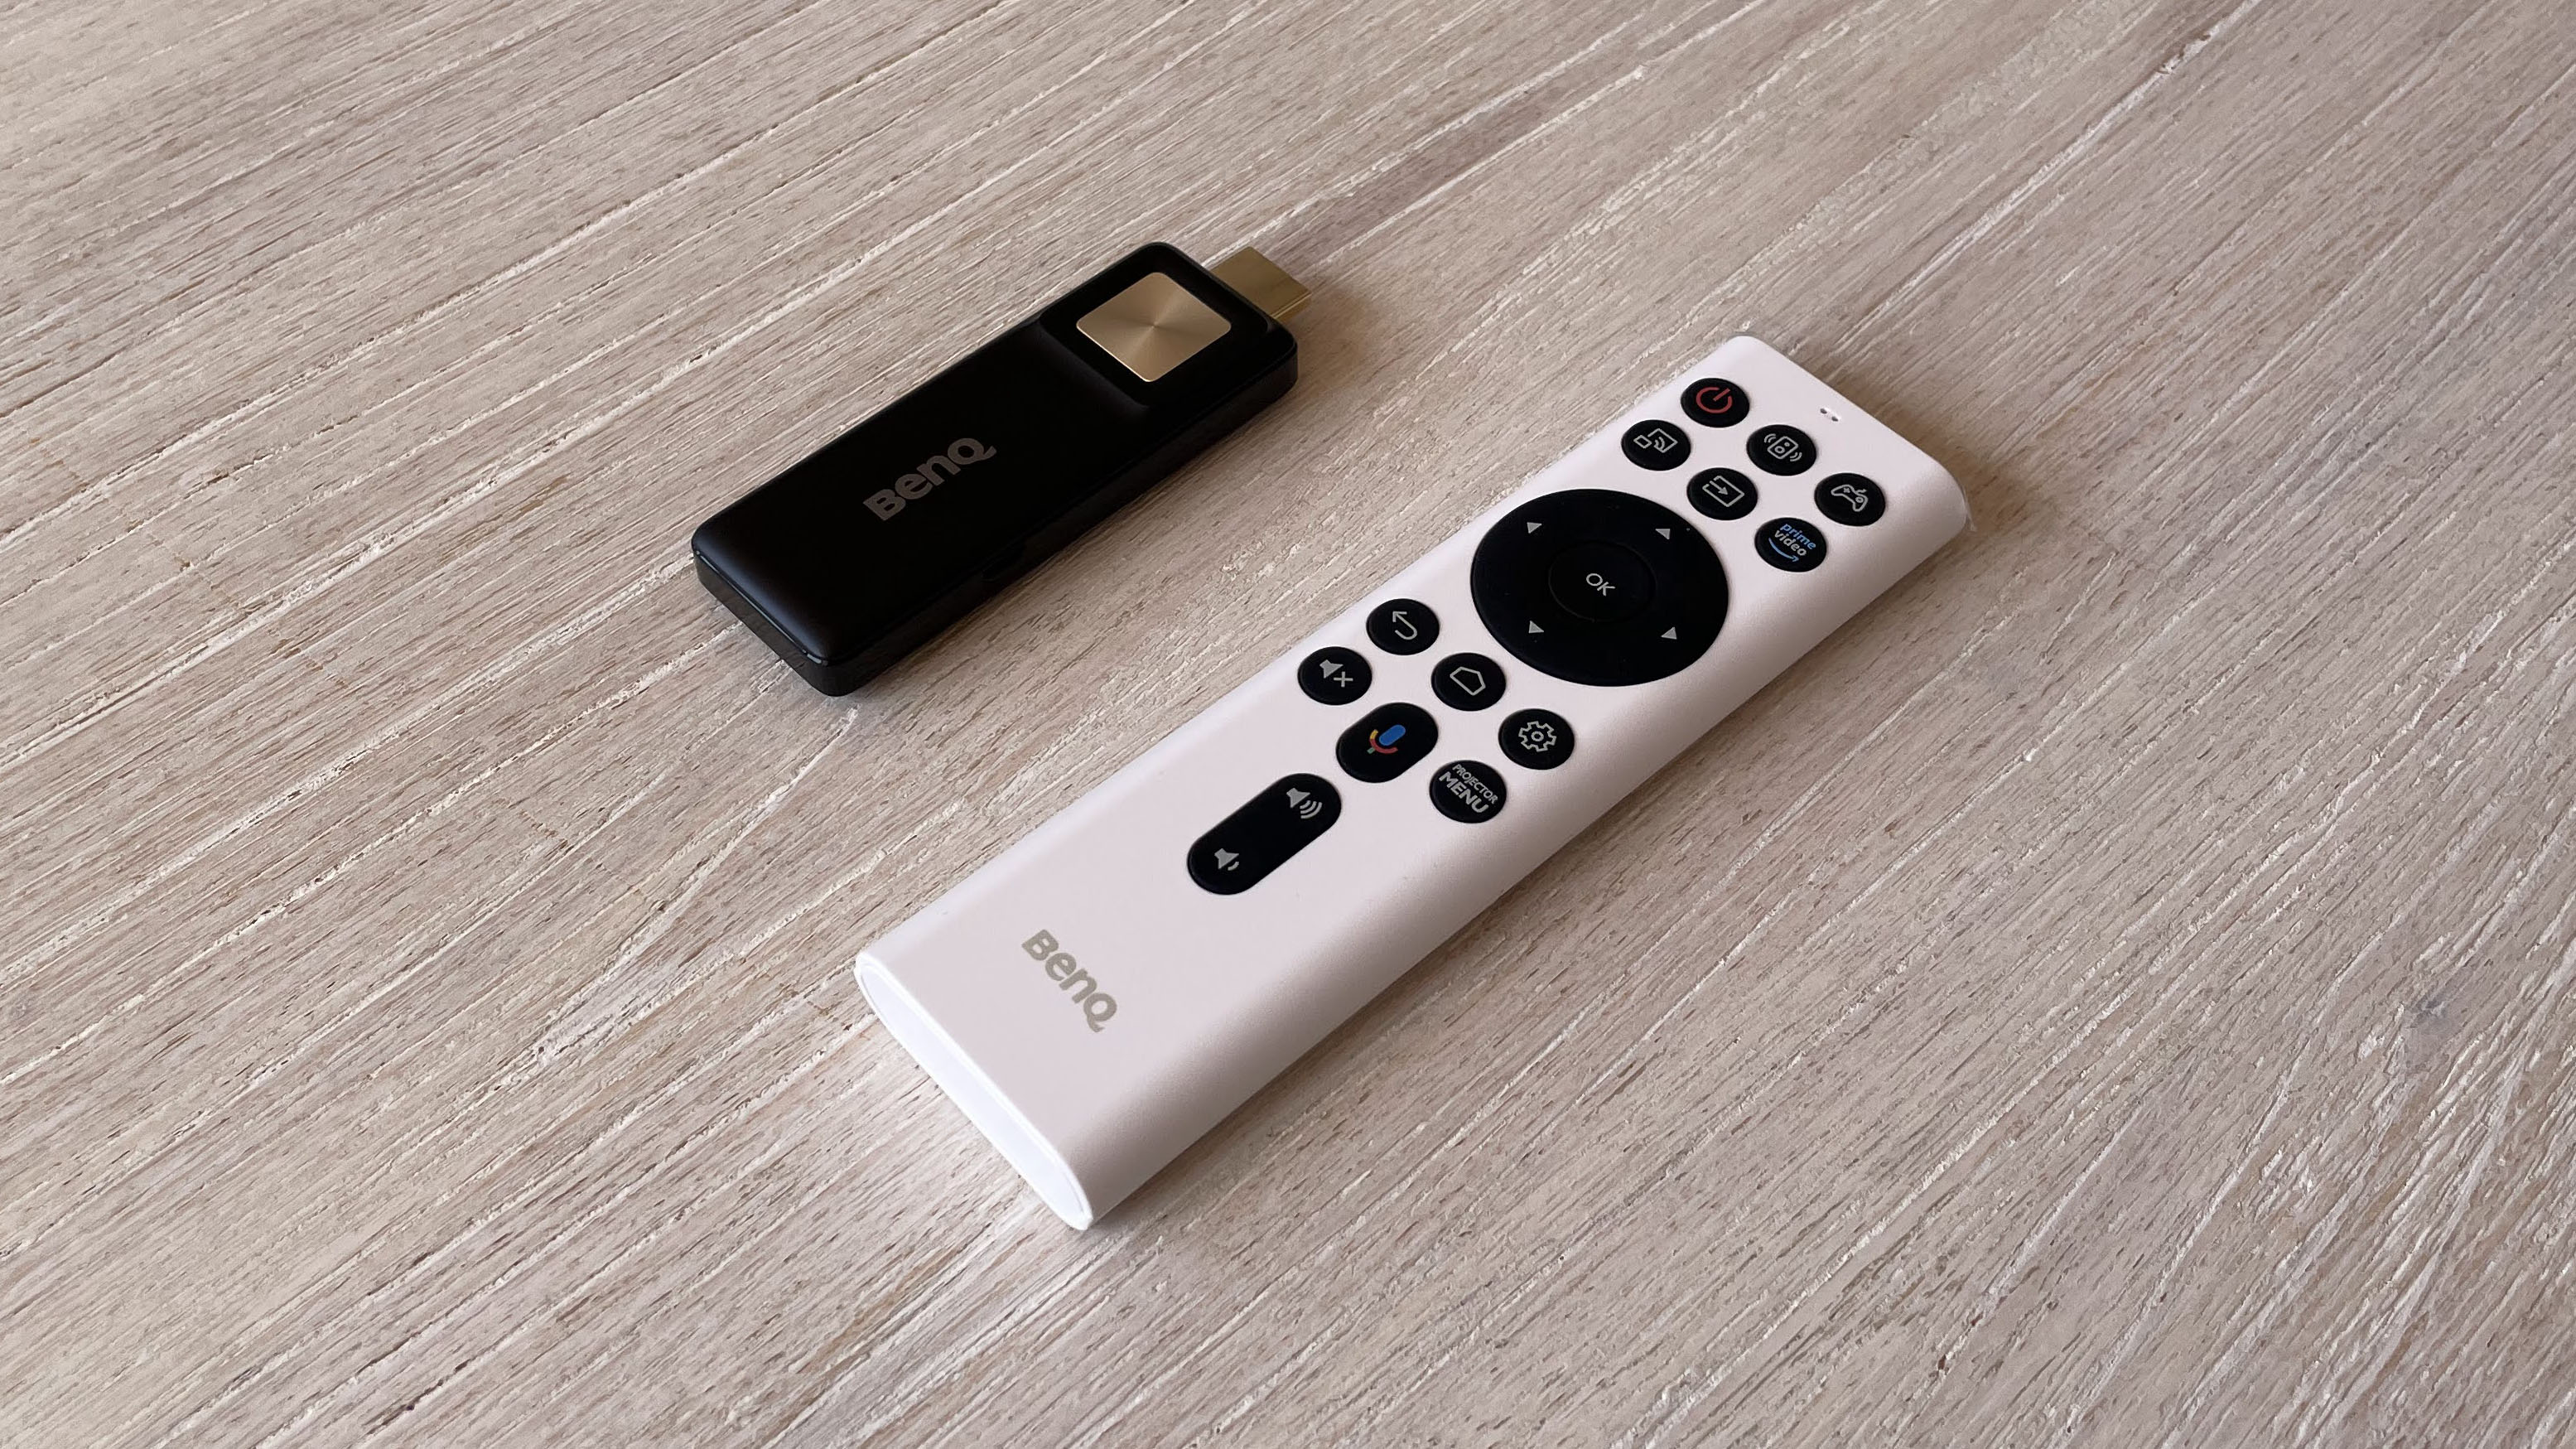 The BenQ X3000i gaming projector's remote control and Android TV dongle.